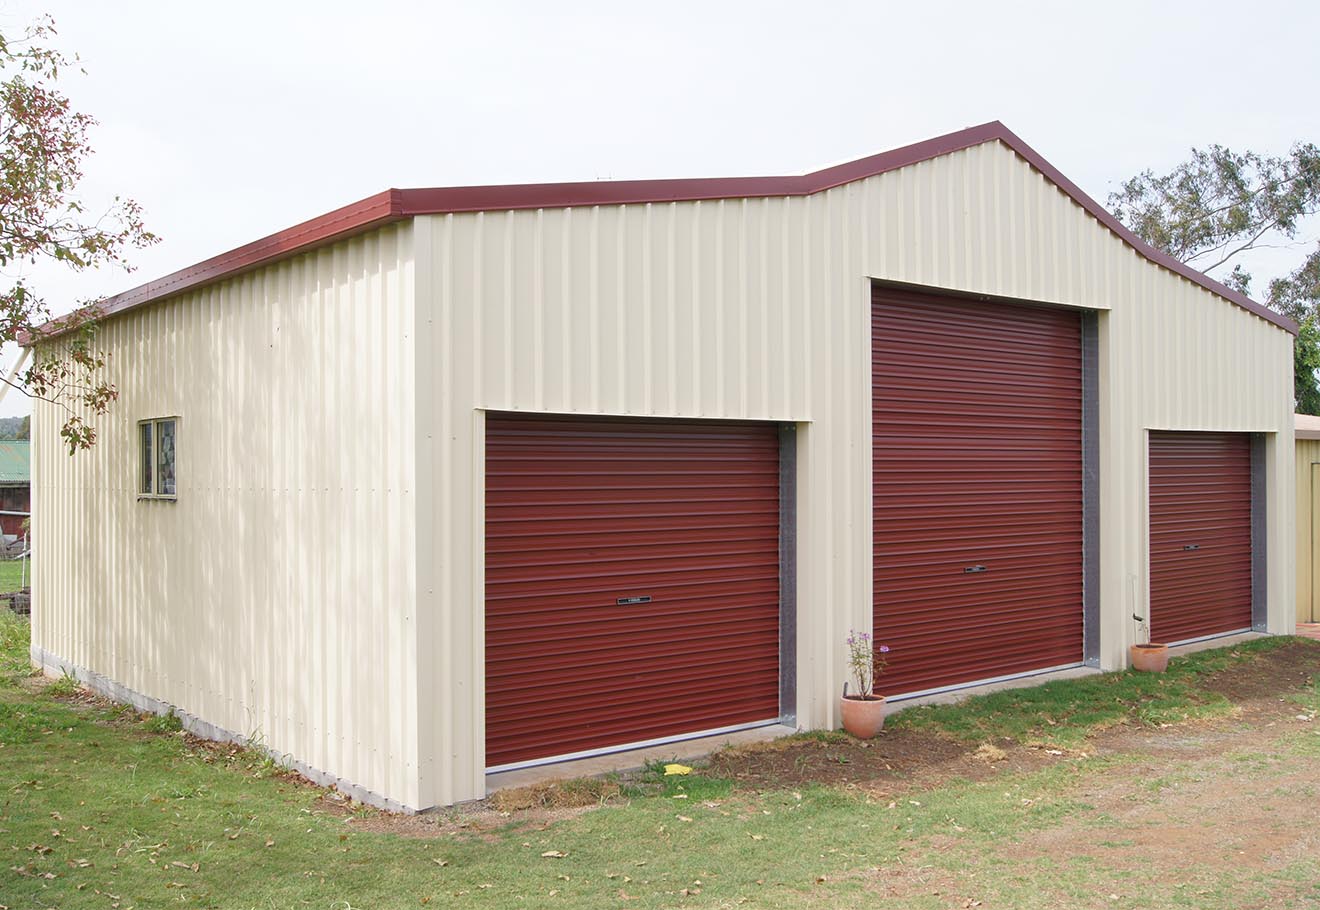 Three door residential shed